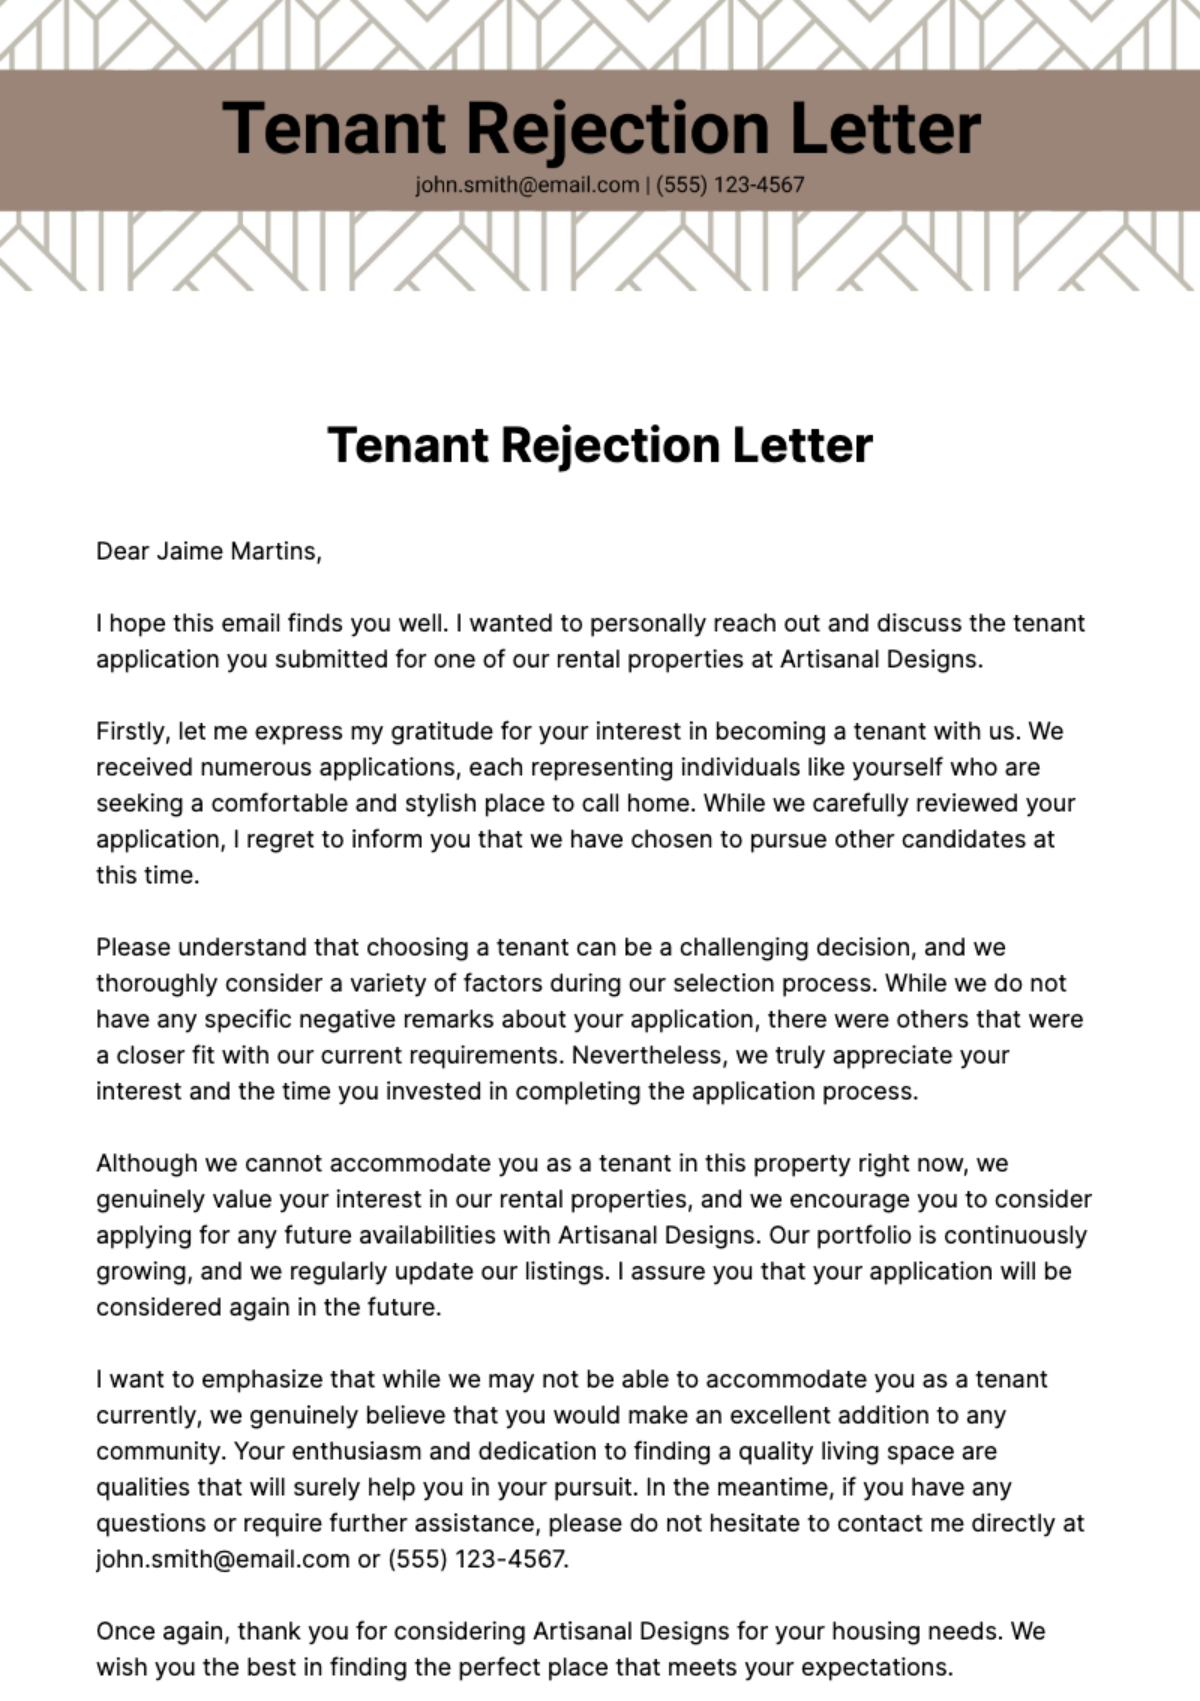 Tenant Rejection Letter Template